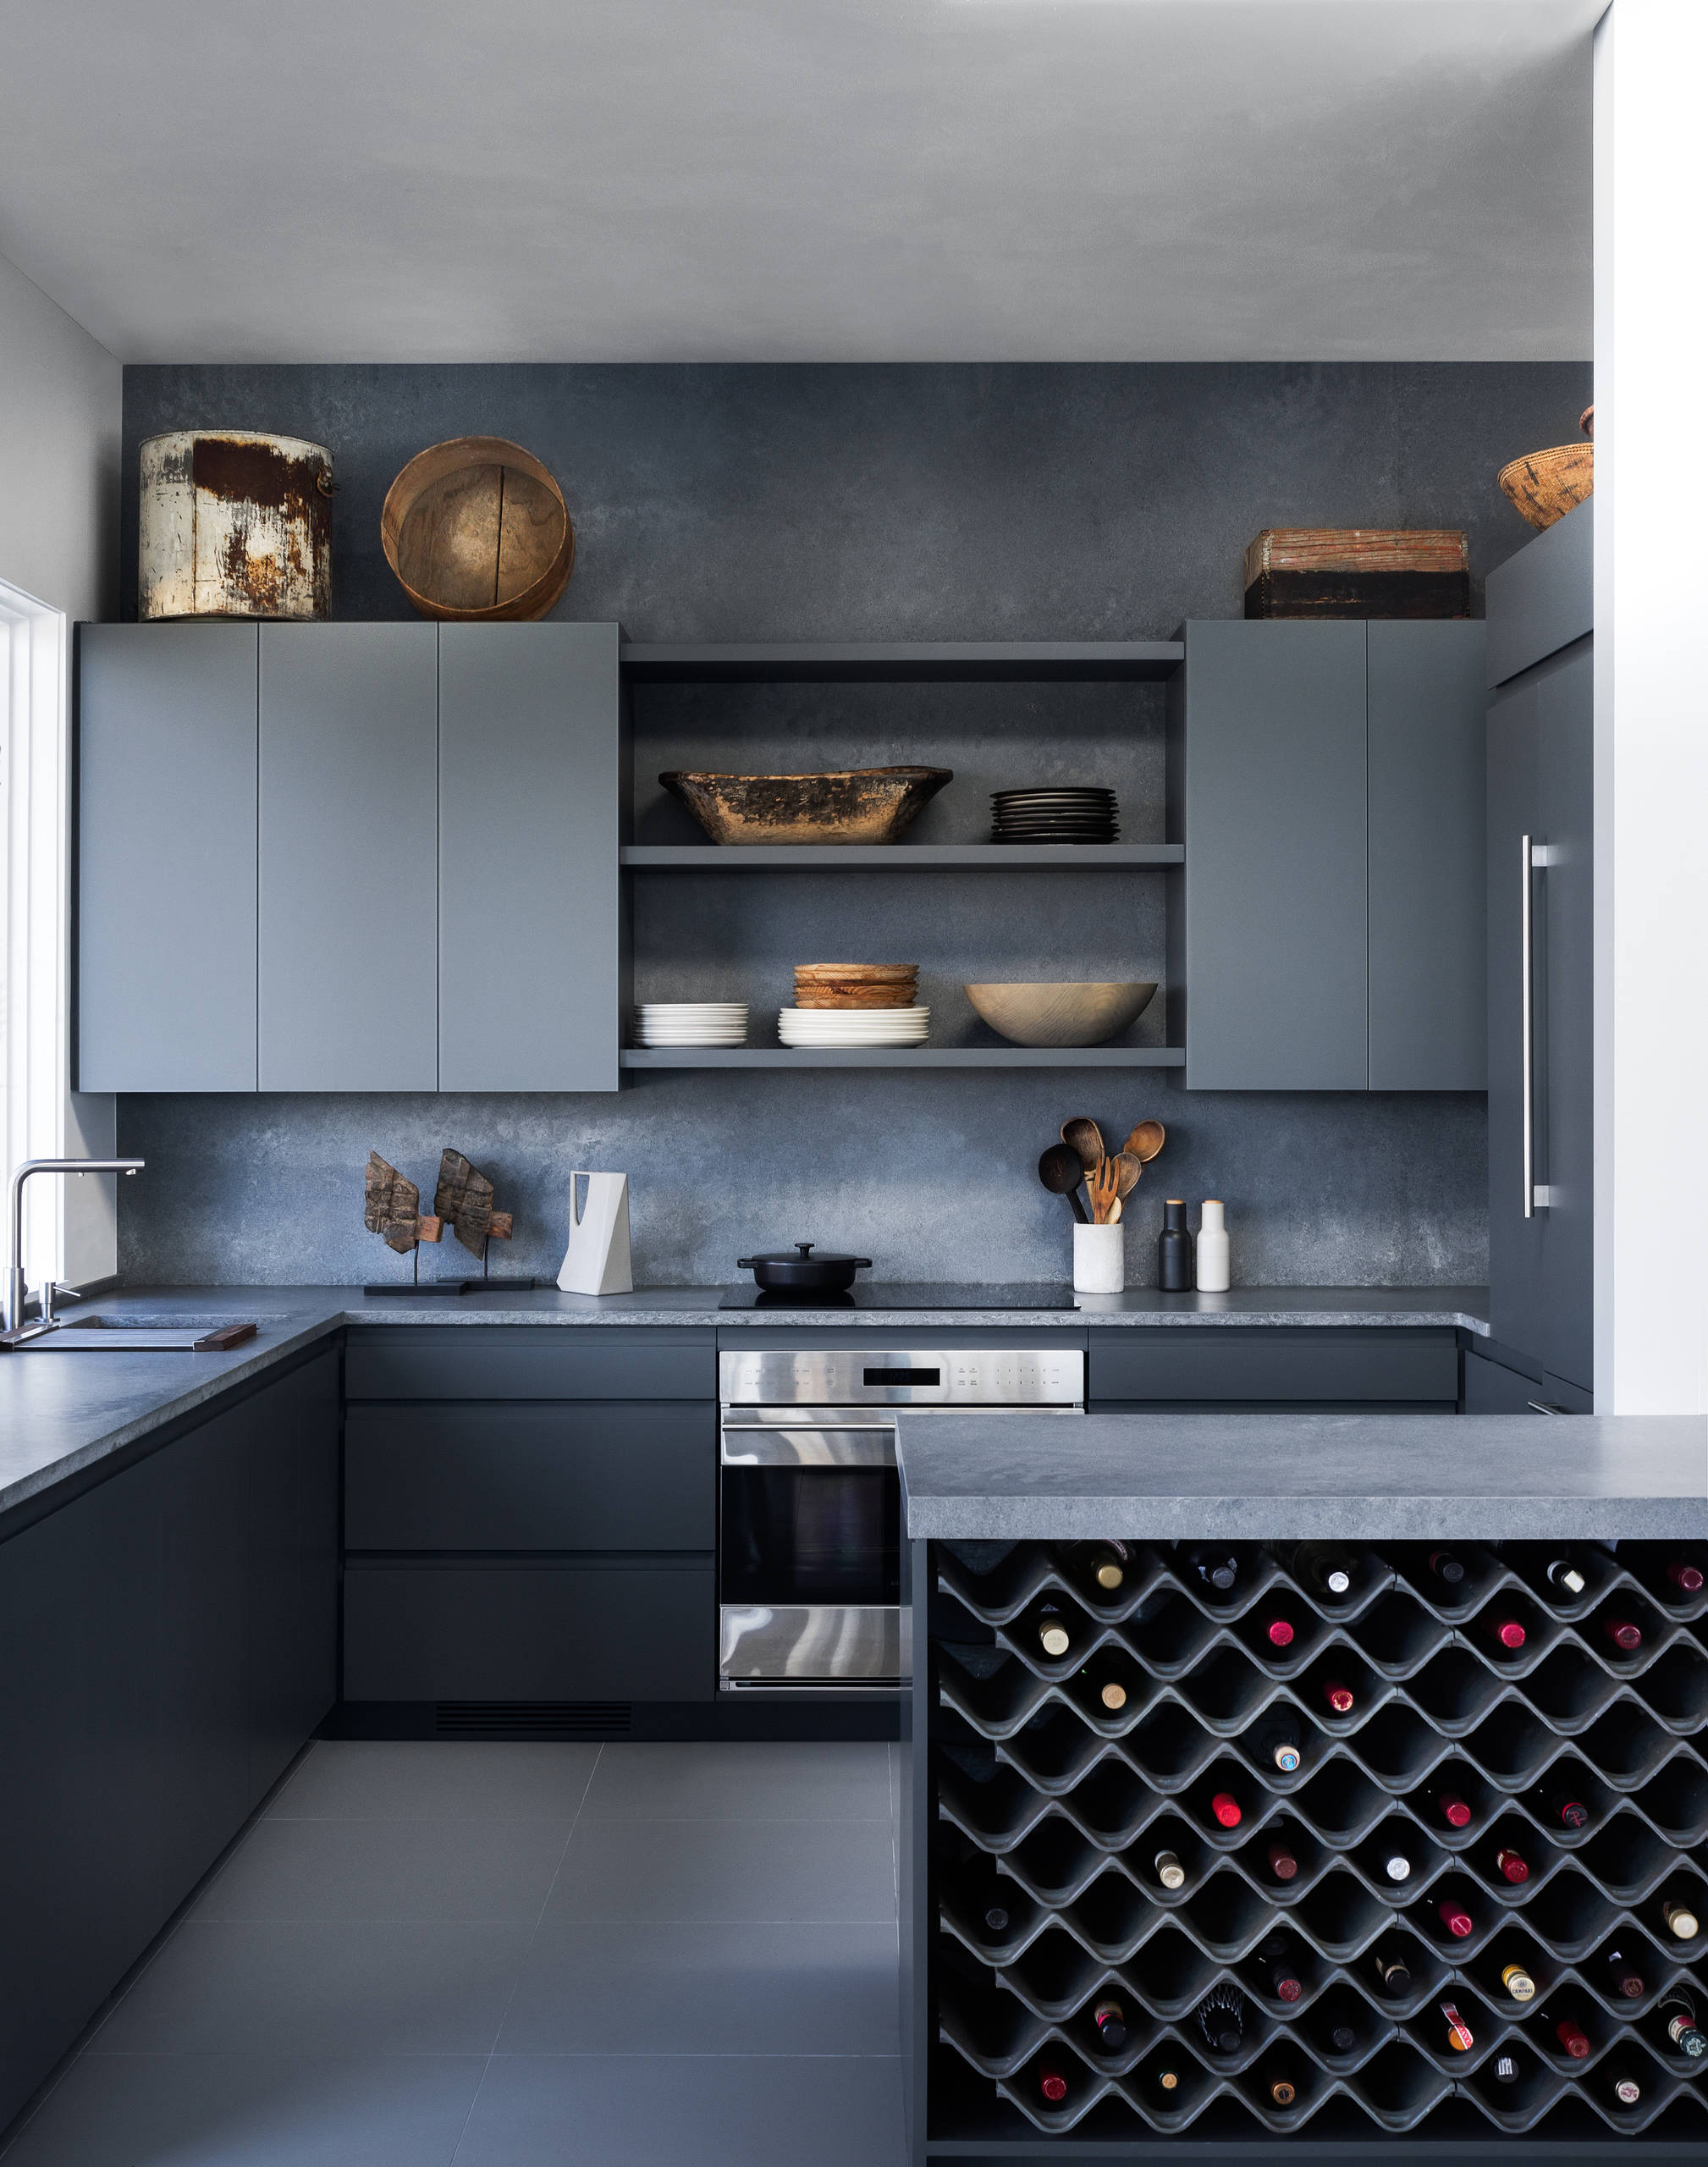 75 Modern Kitchen Ideas You'Ll Love - May, 2023 | Houzz